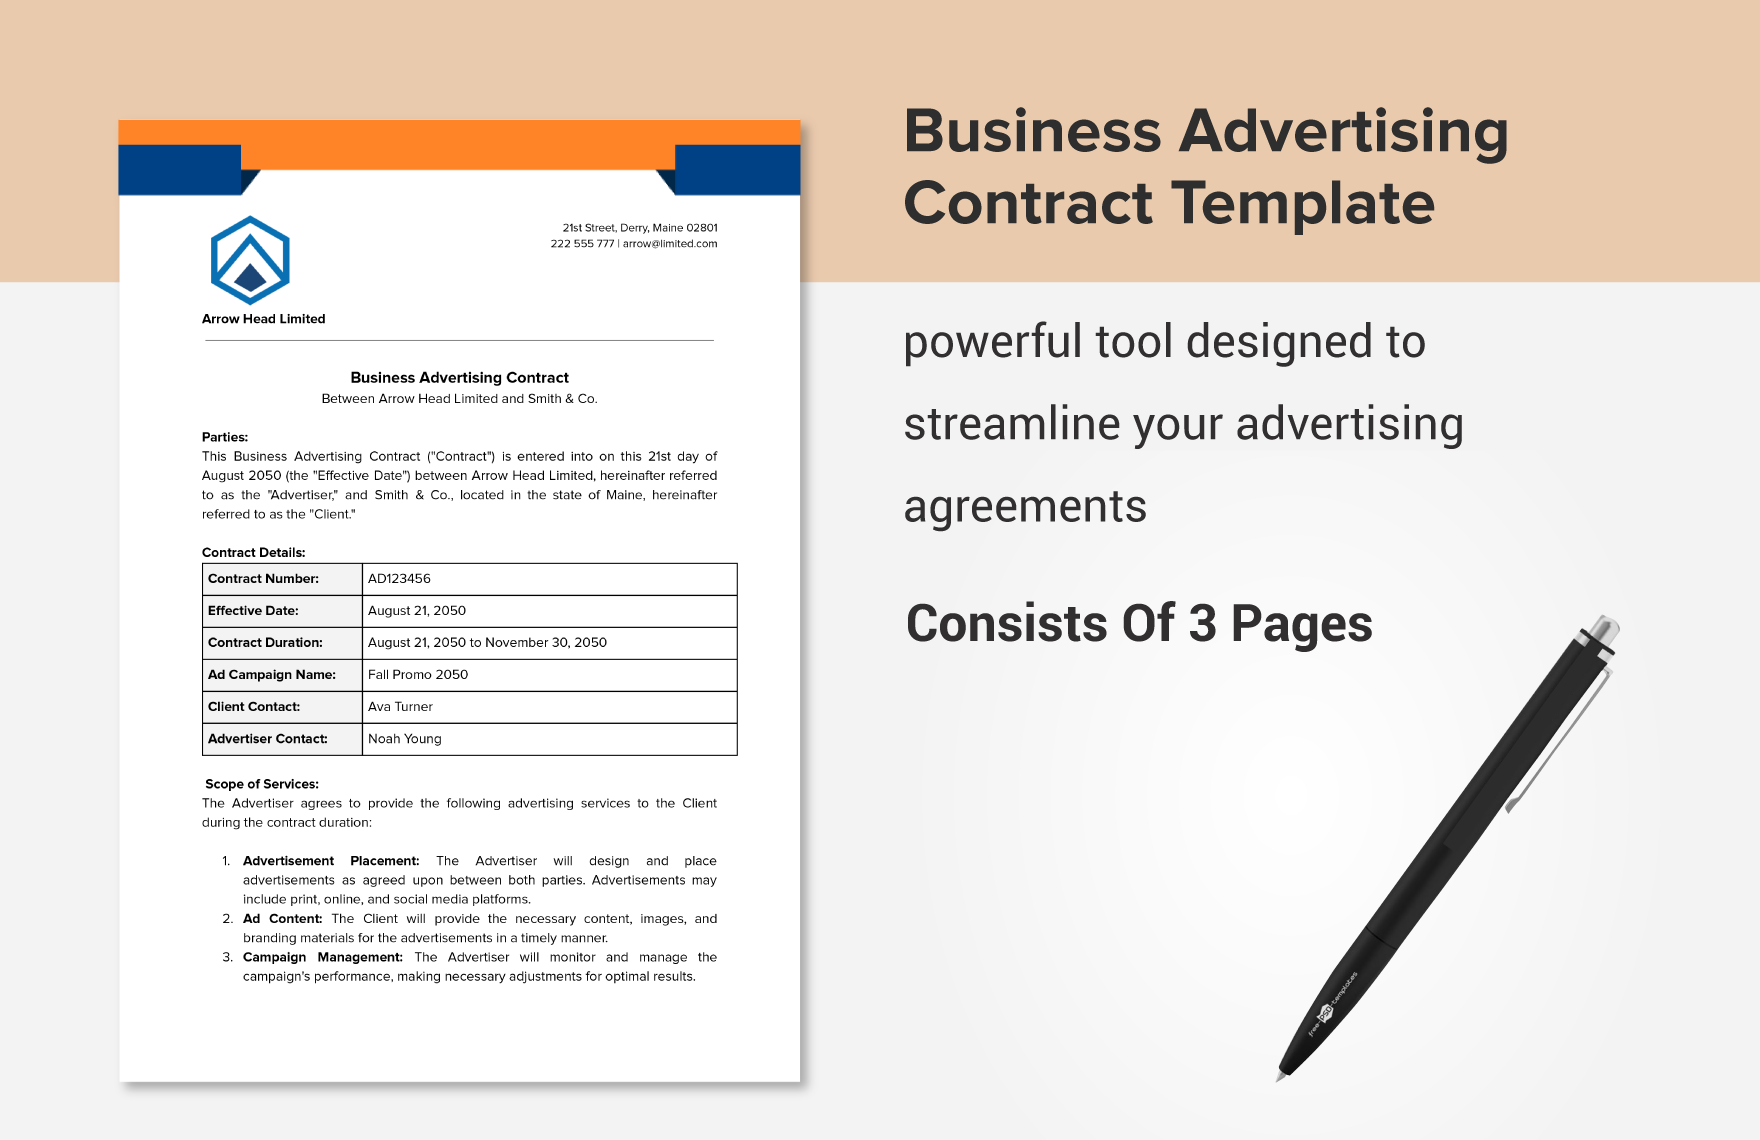 Business Advertising Contract Template